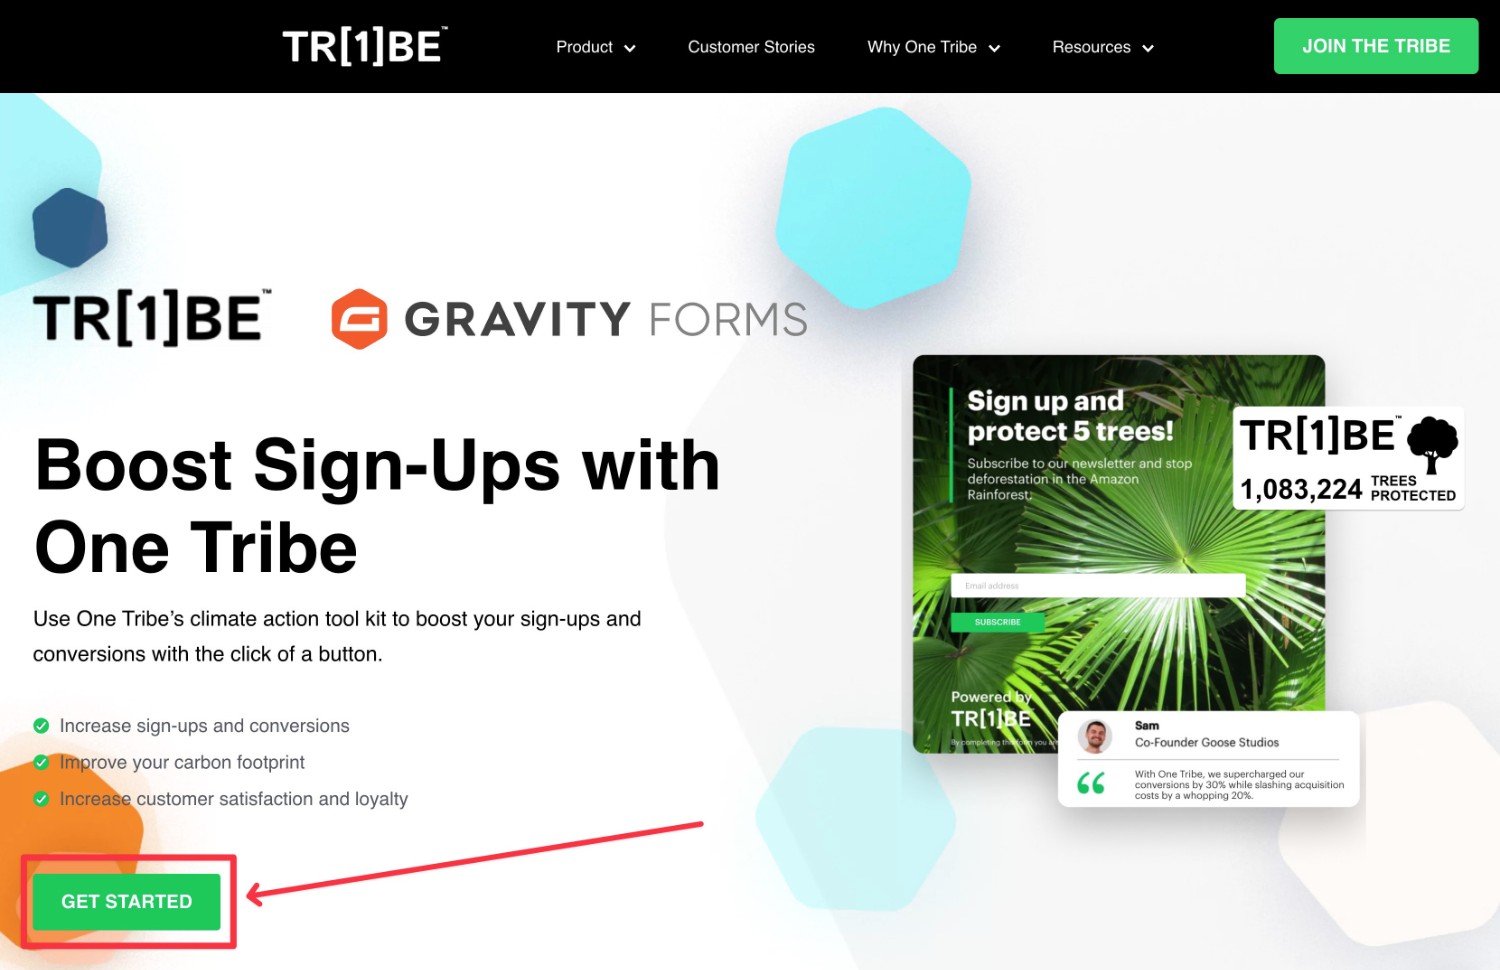 Sign up for One Tribe account